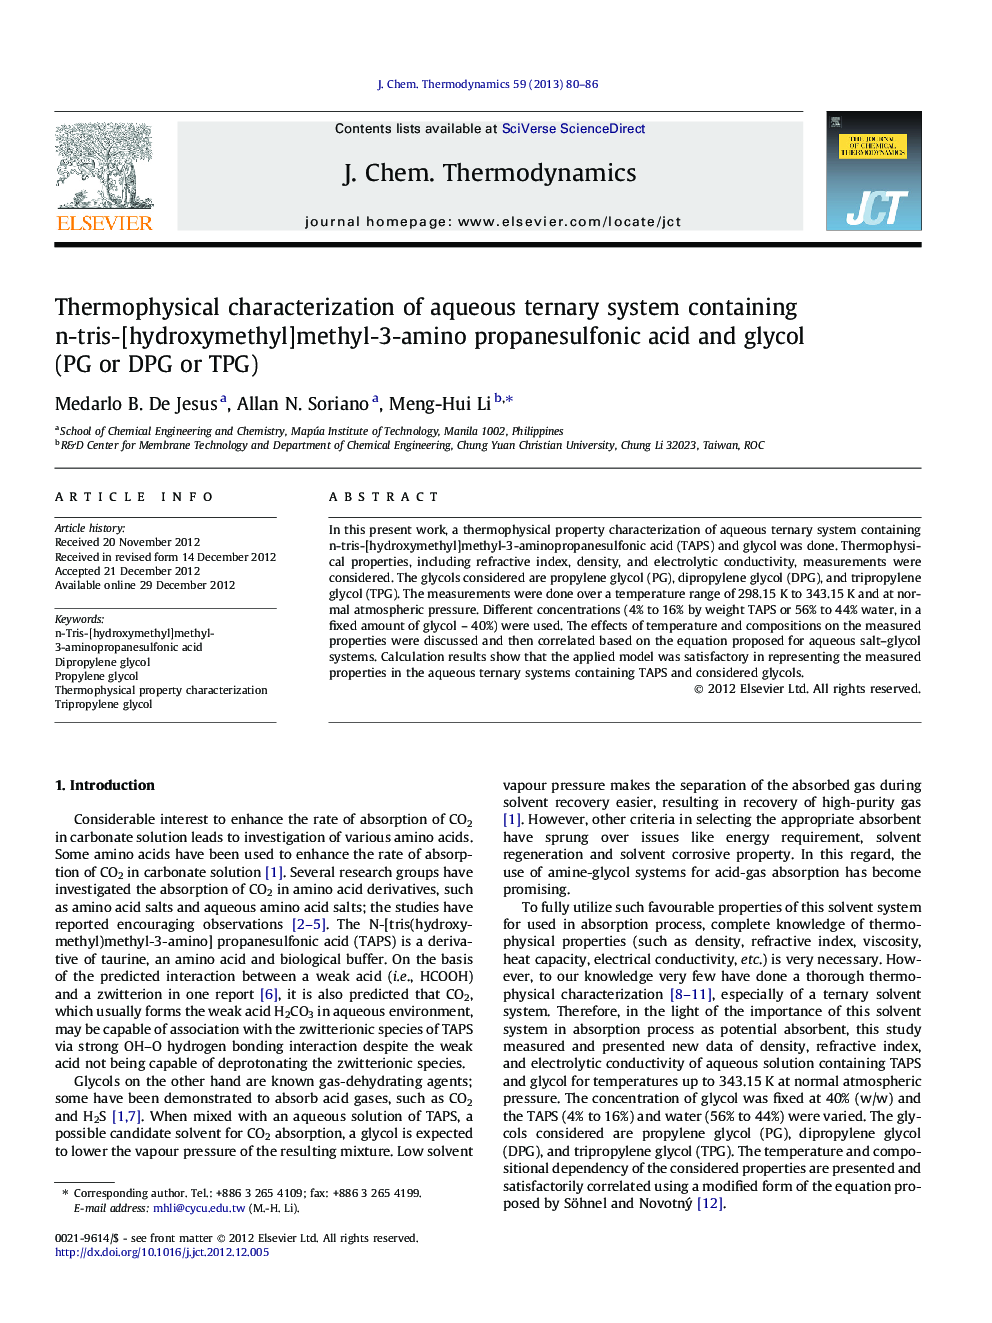 Thermophysical characterization of aqueous ternary system containing n-tris-[hydroxymethyl]methyl-3-amino propanesulfonic acid and glycol (PG or DPG or TPG)